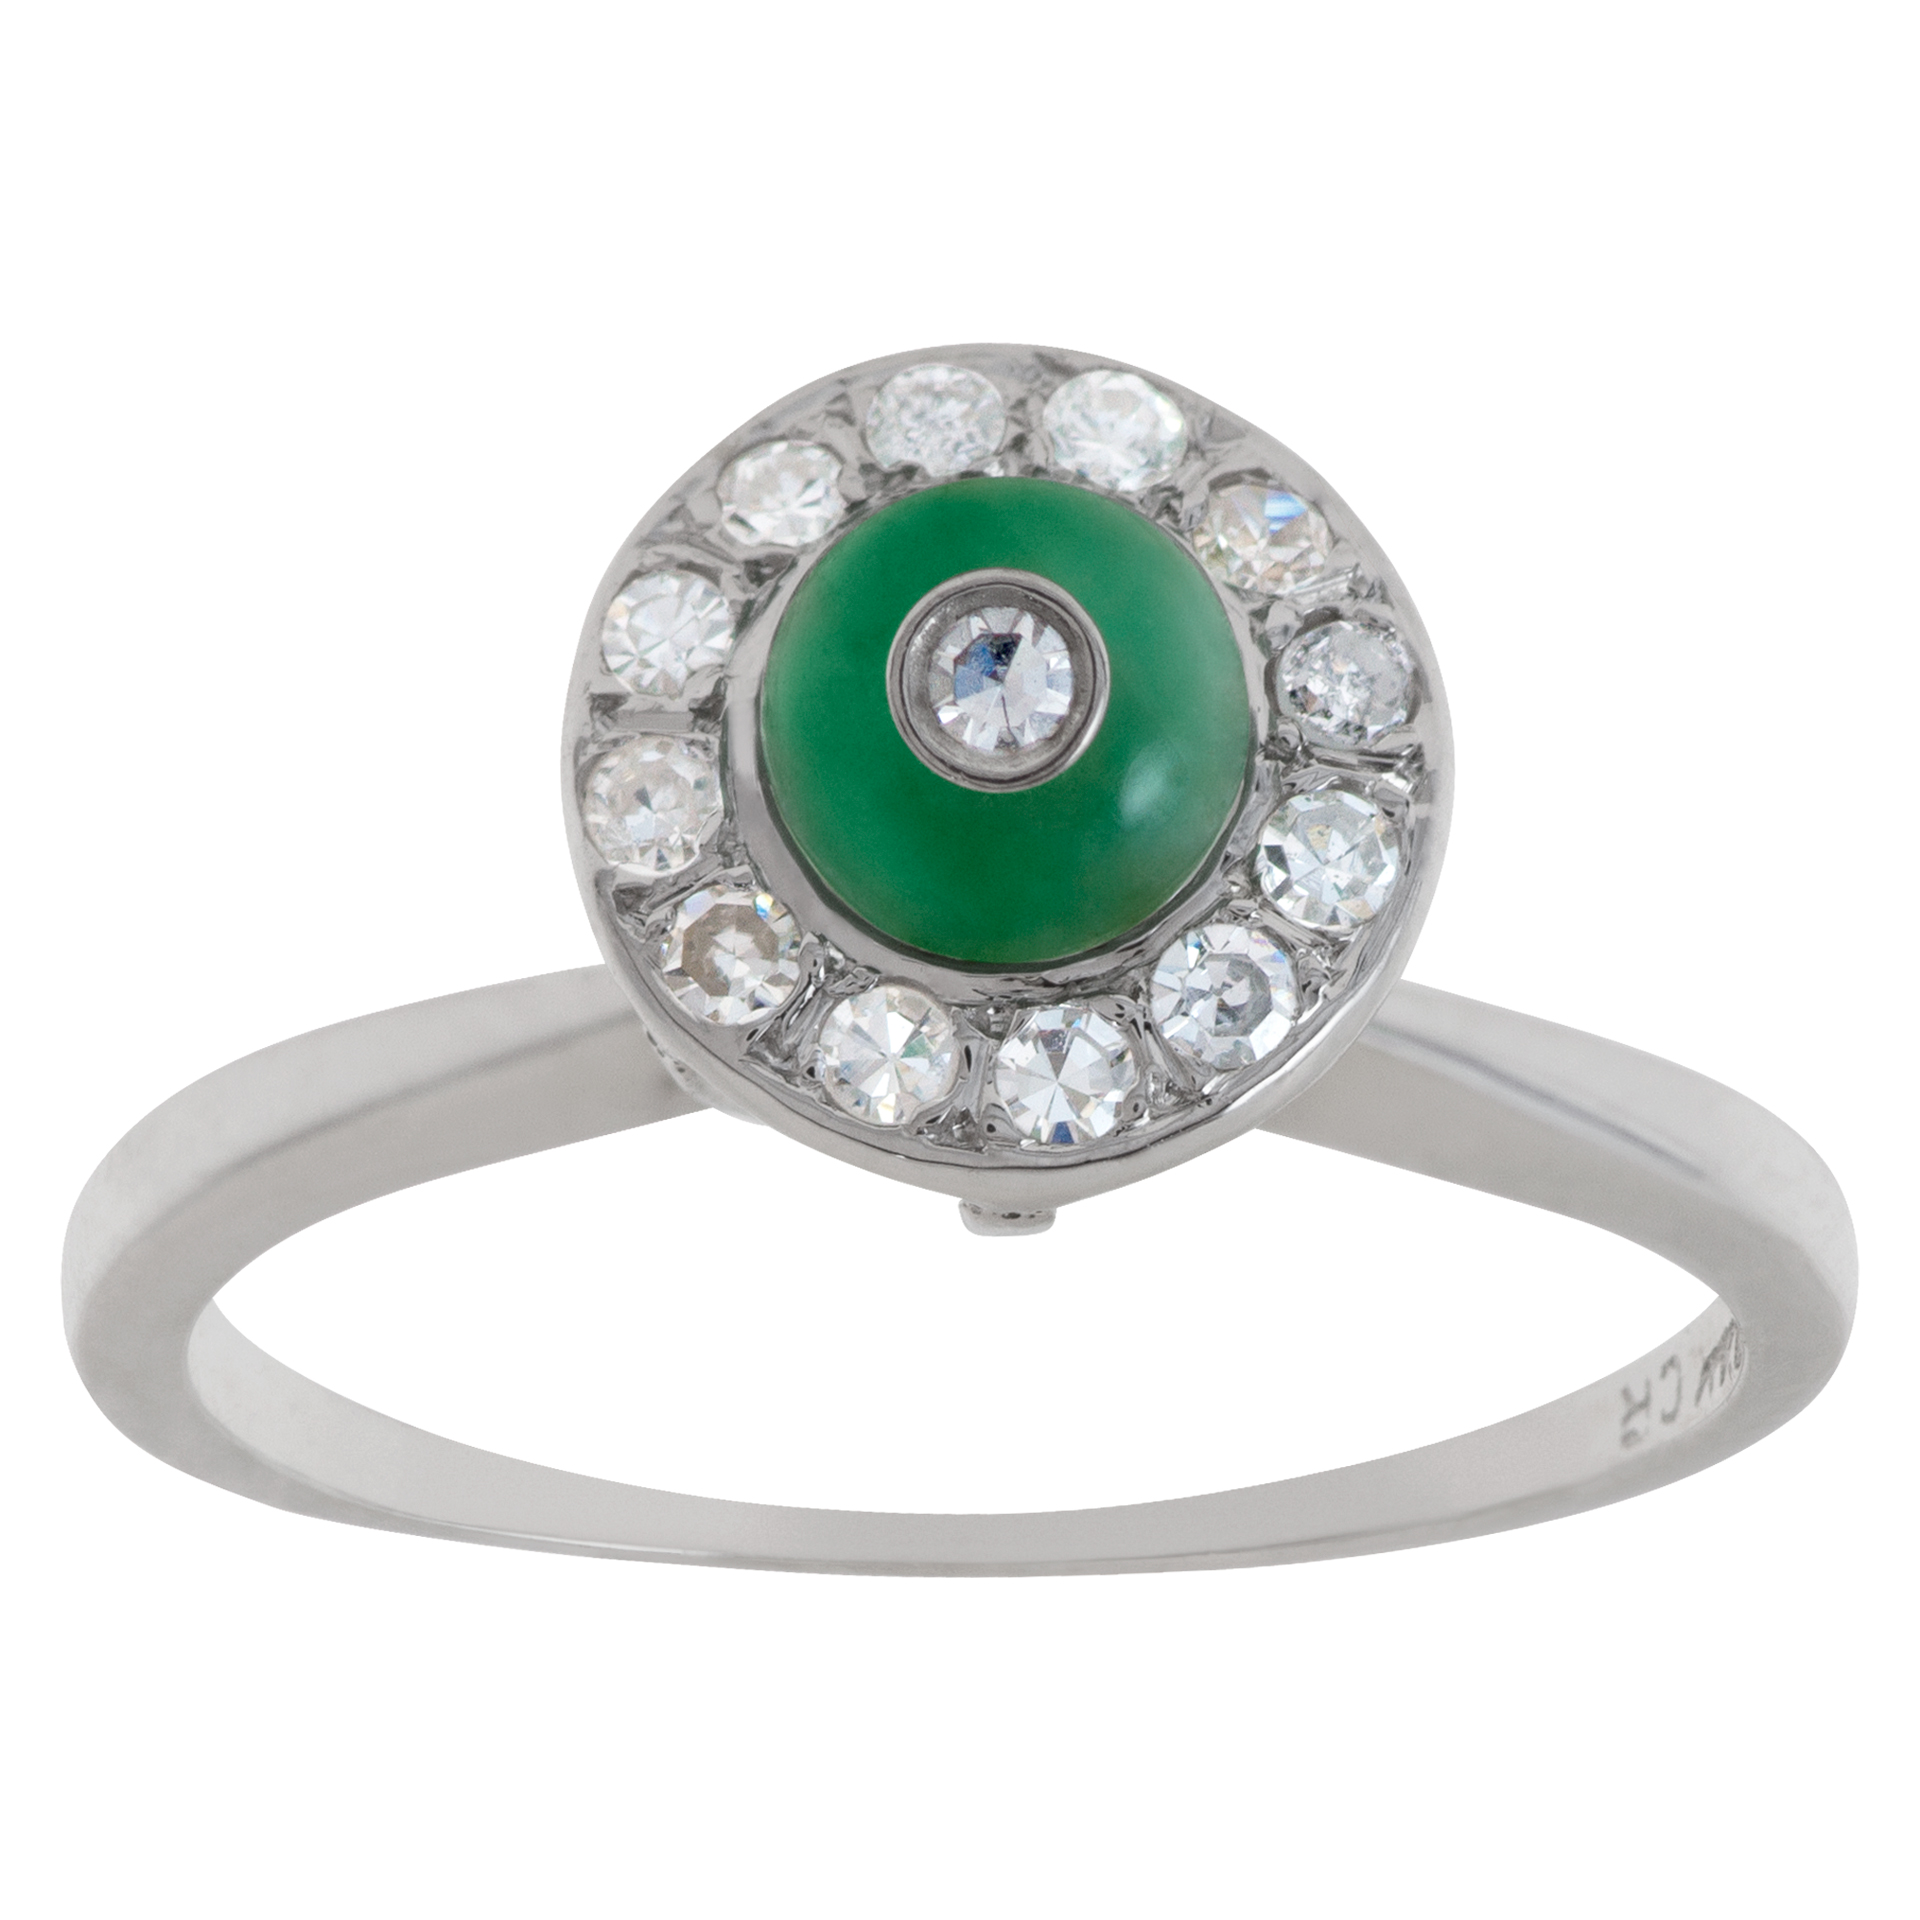 Diamond and Jade ring in 14k white gold